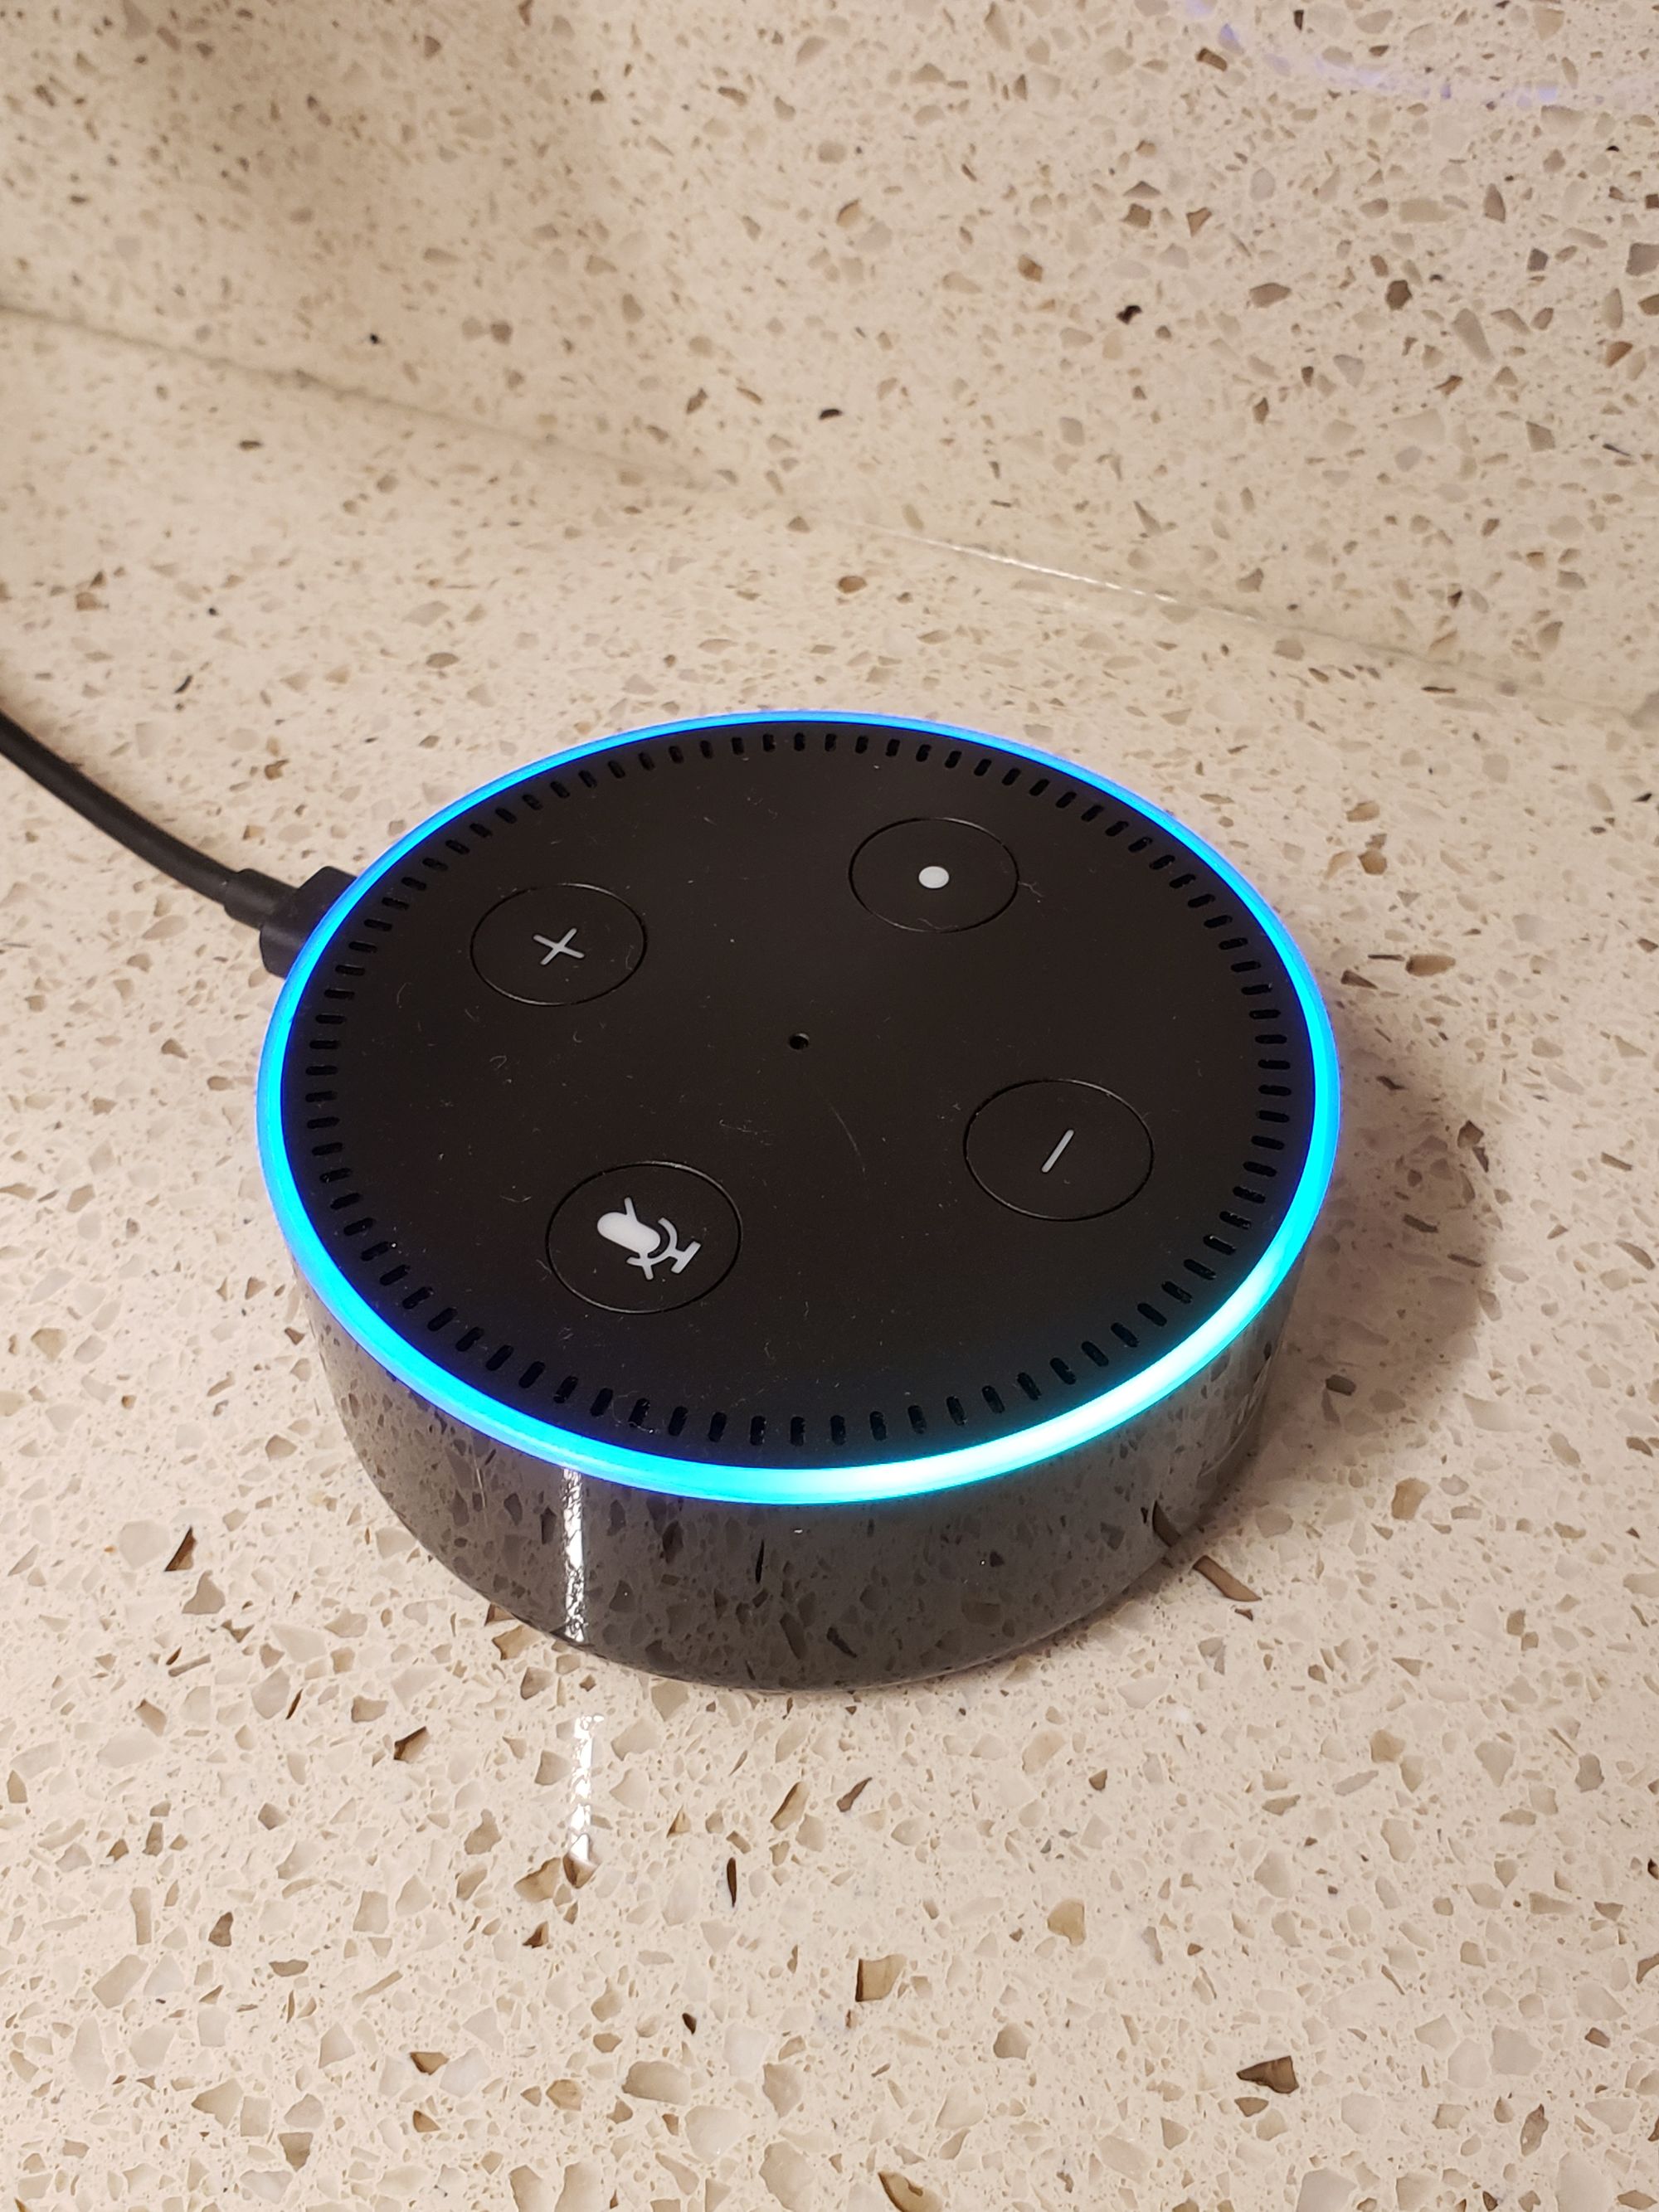 Voice assistant for home commands?